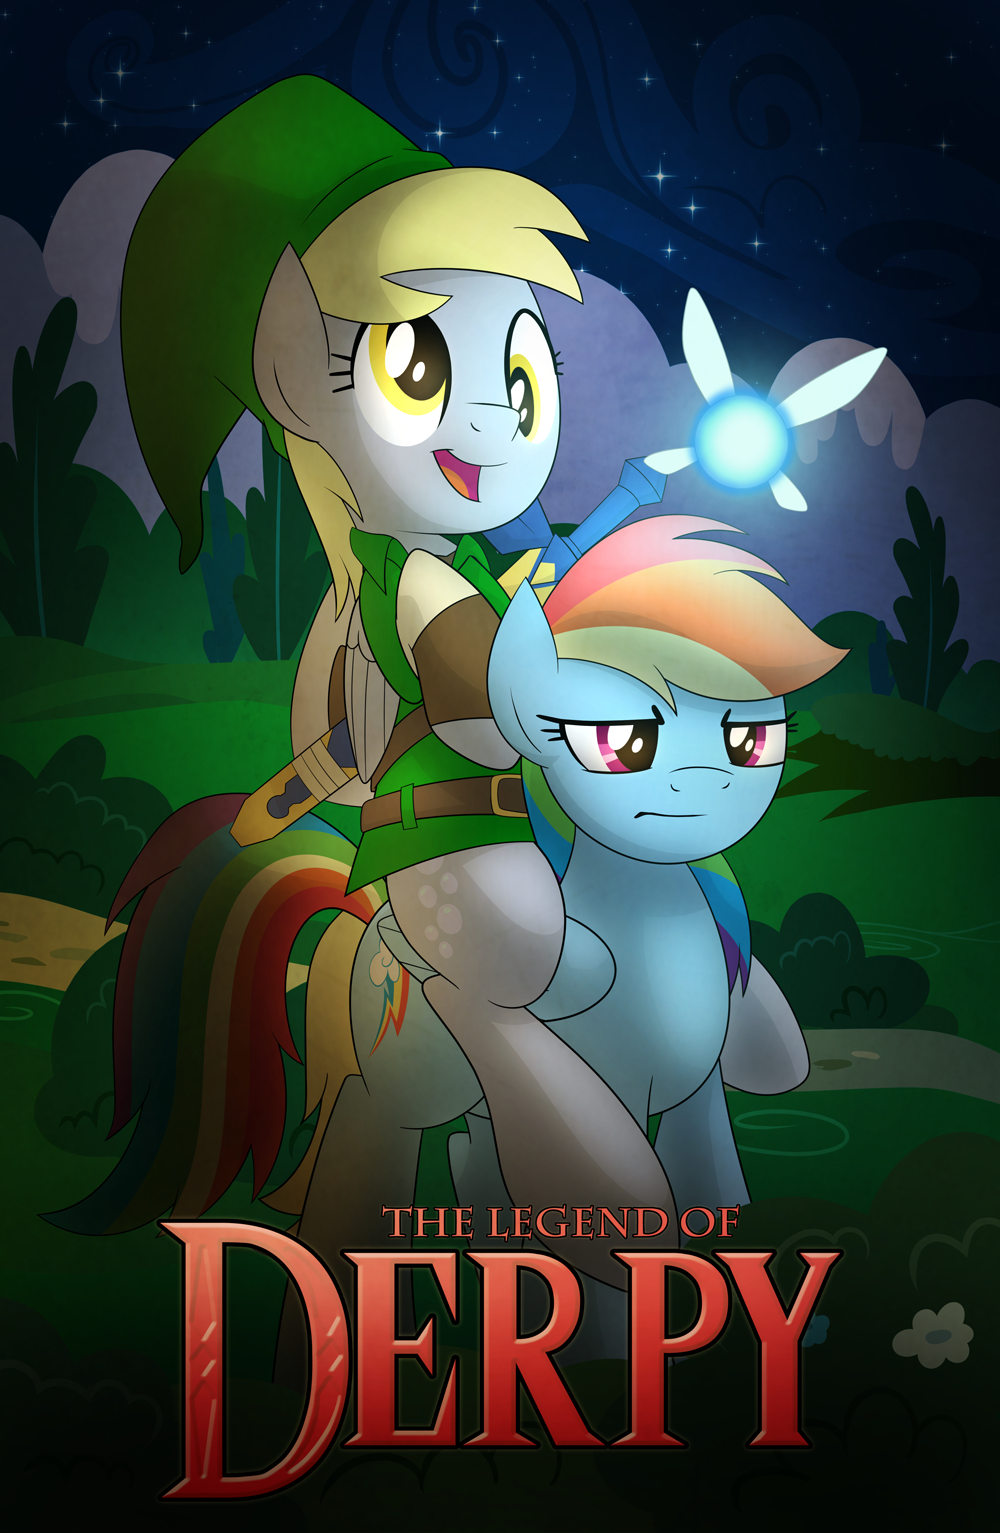 The Legend of Derpy